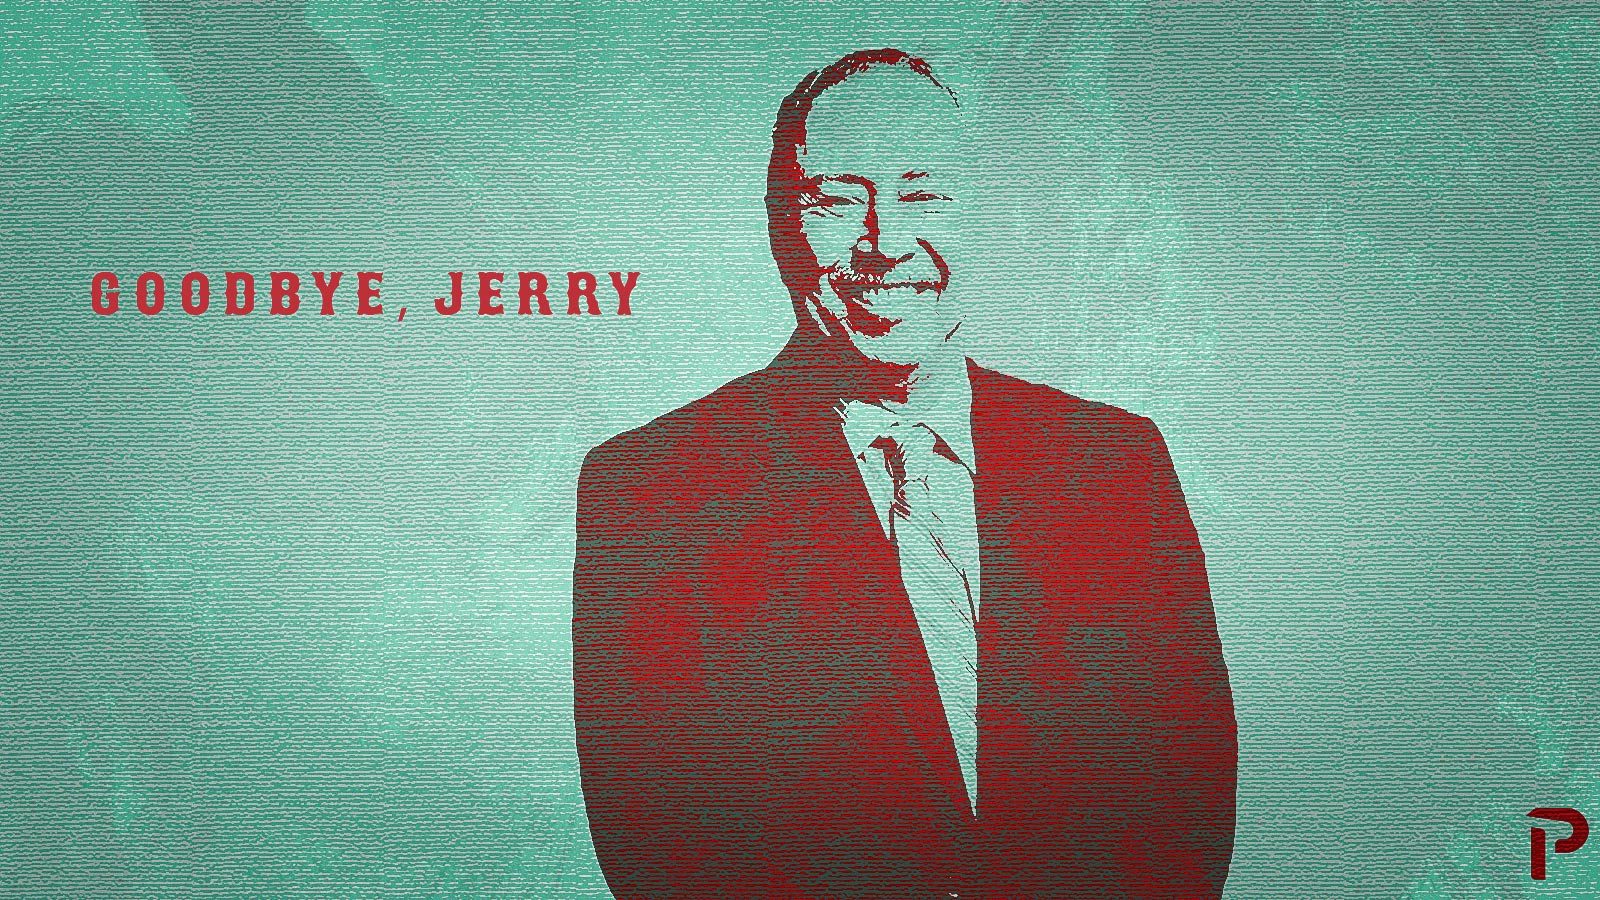 Red Sox Legend Jerry Remy is Ready to Talk About, Well, Everything